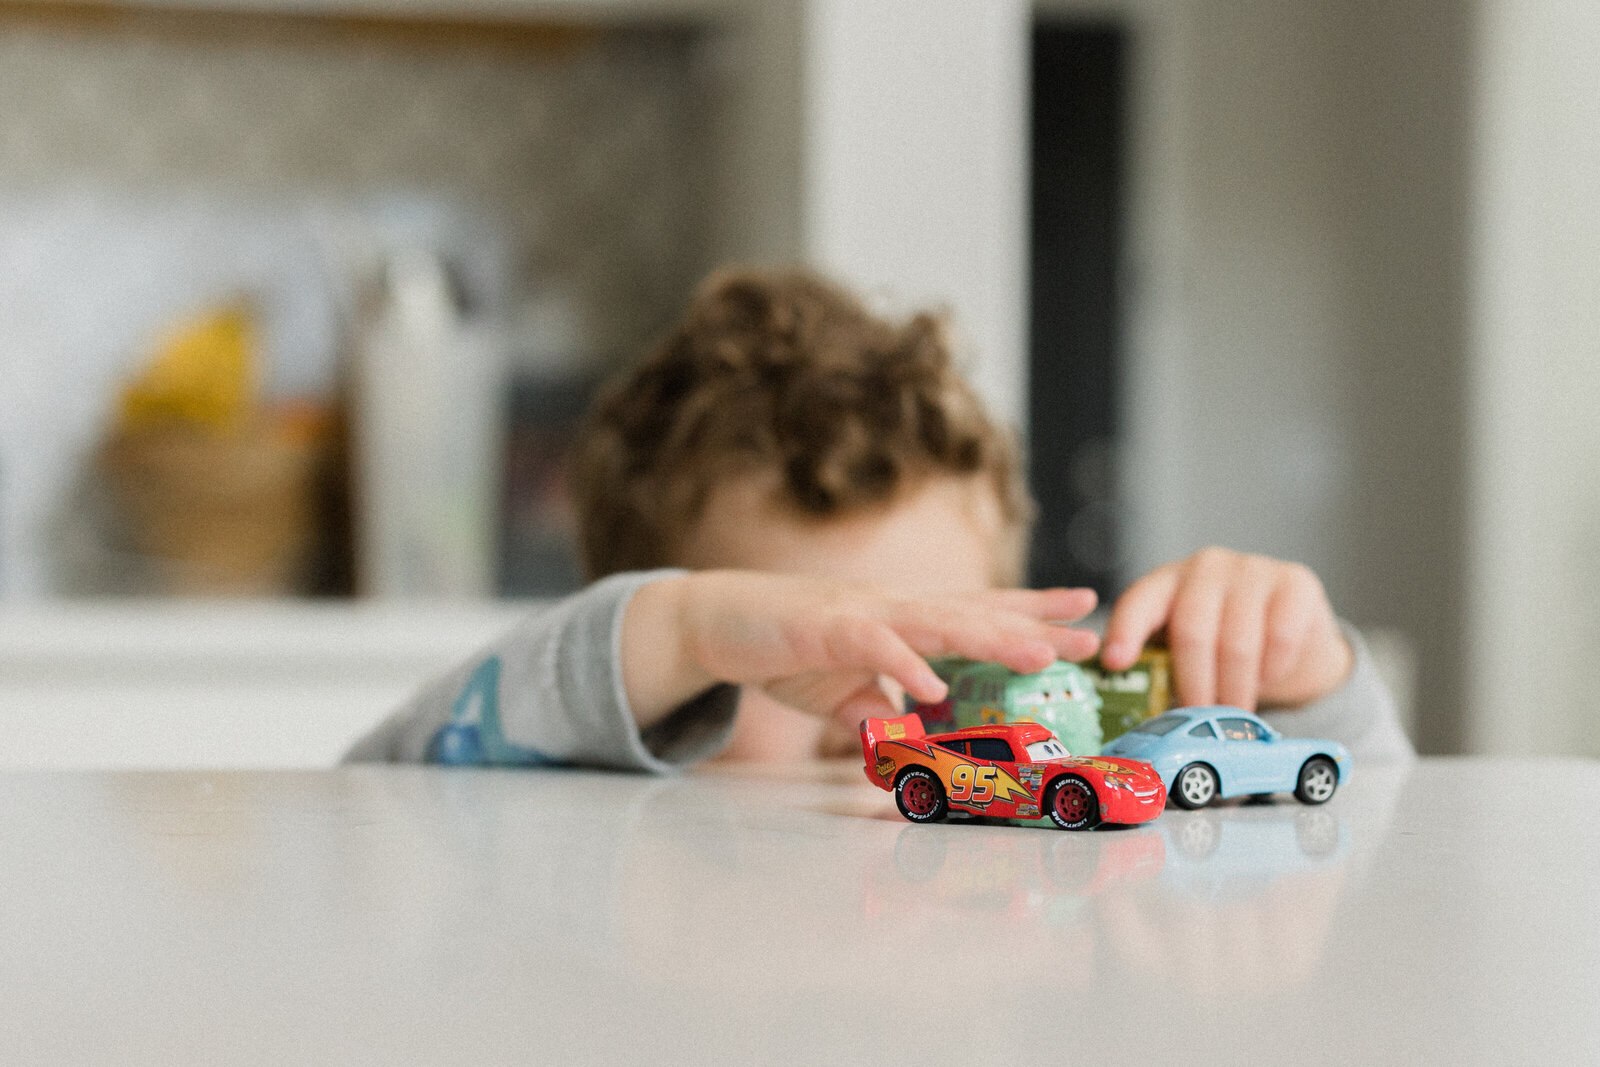 Tiny hands reach up onto the counter to grab some toy cars